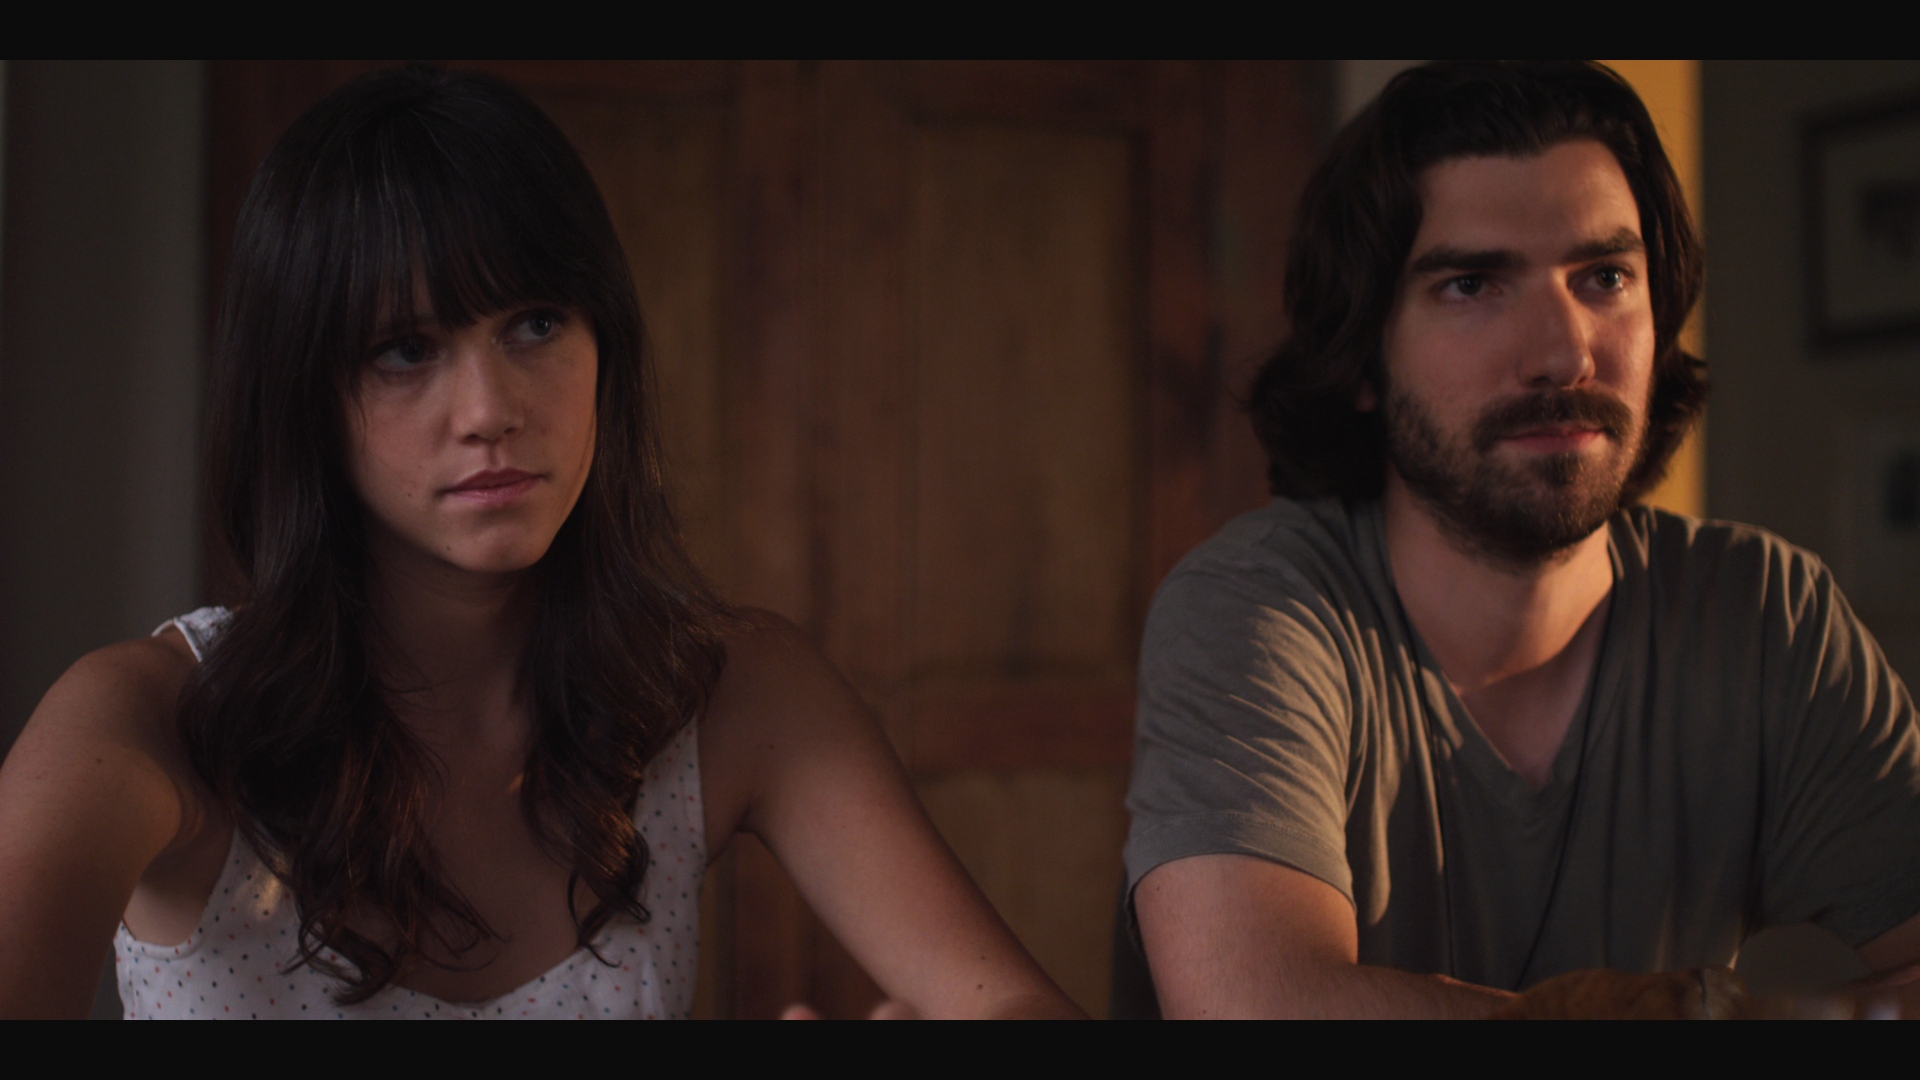 Still of Brandon Stacy and Meredith Shank in Phin (2013)